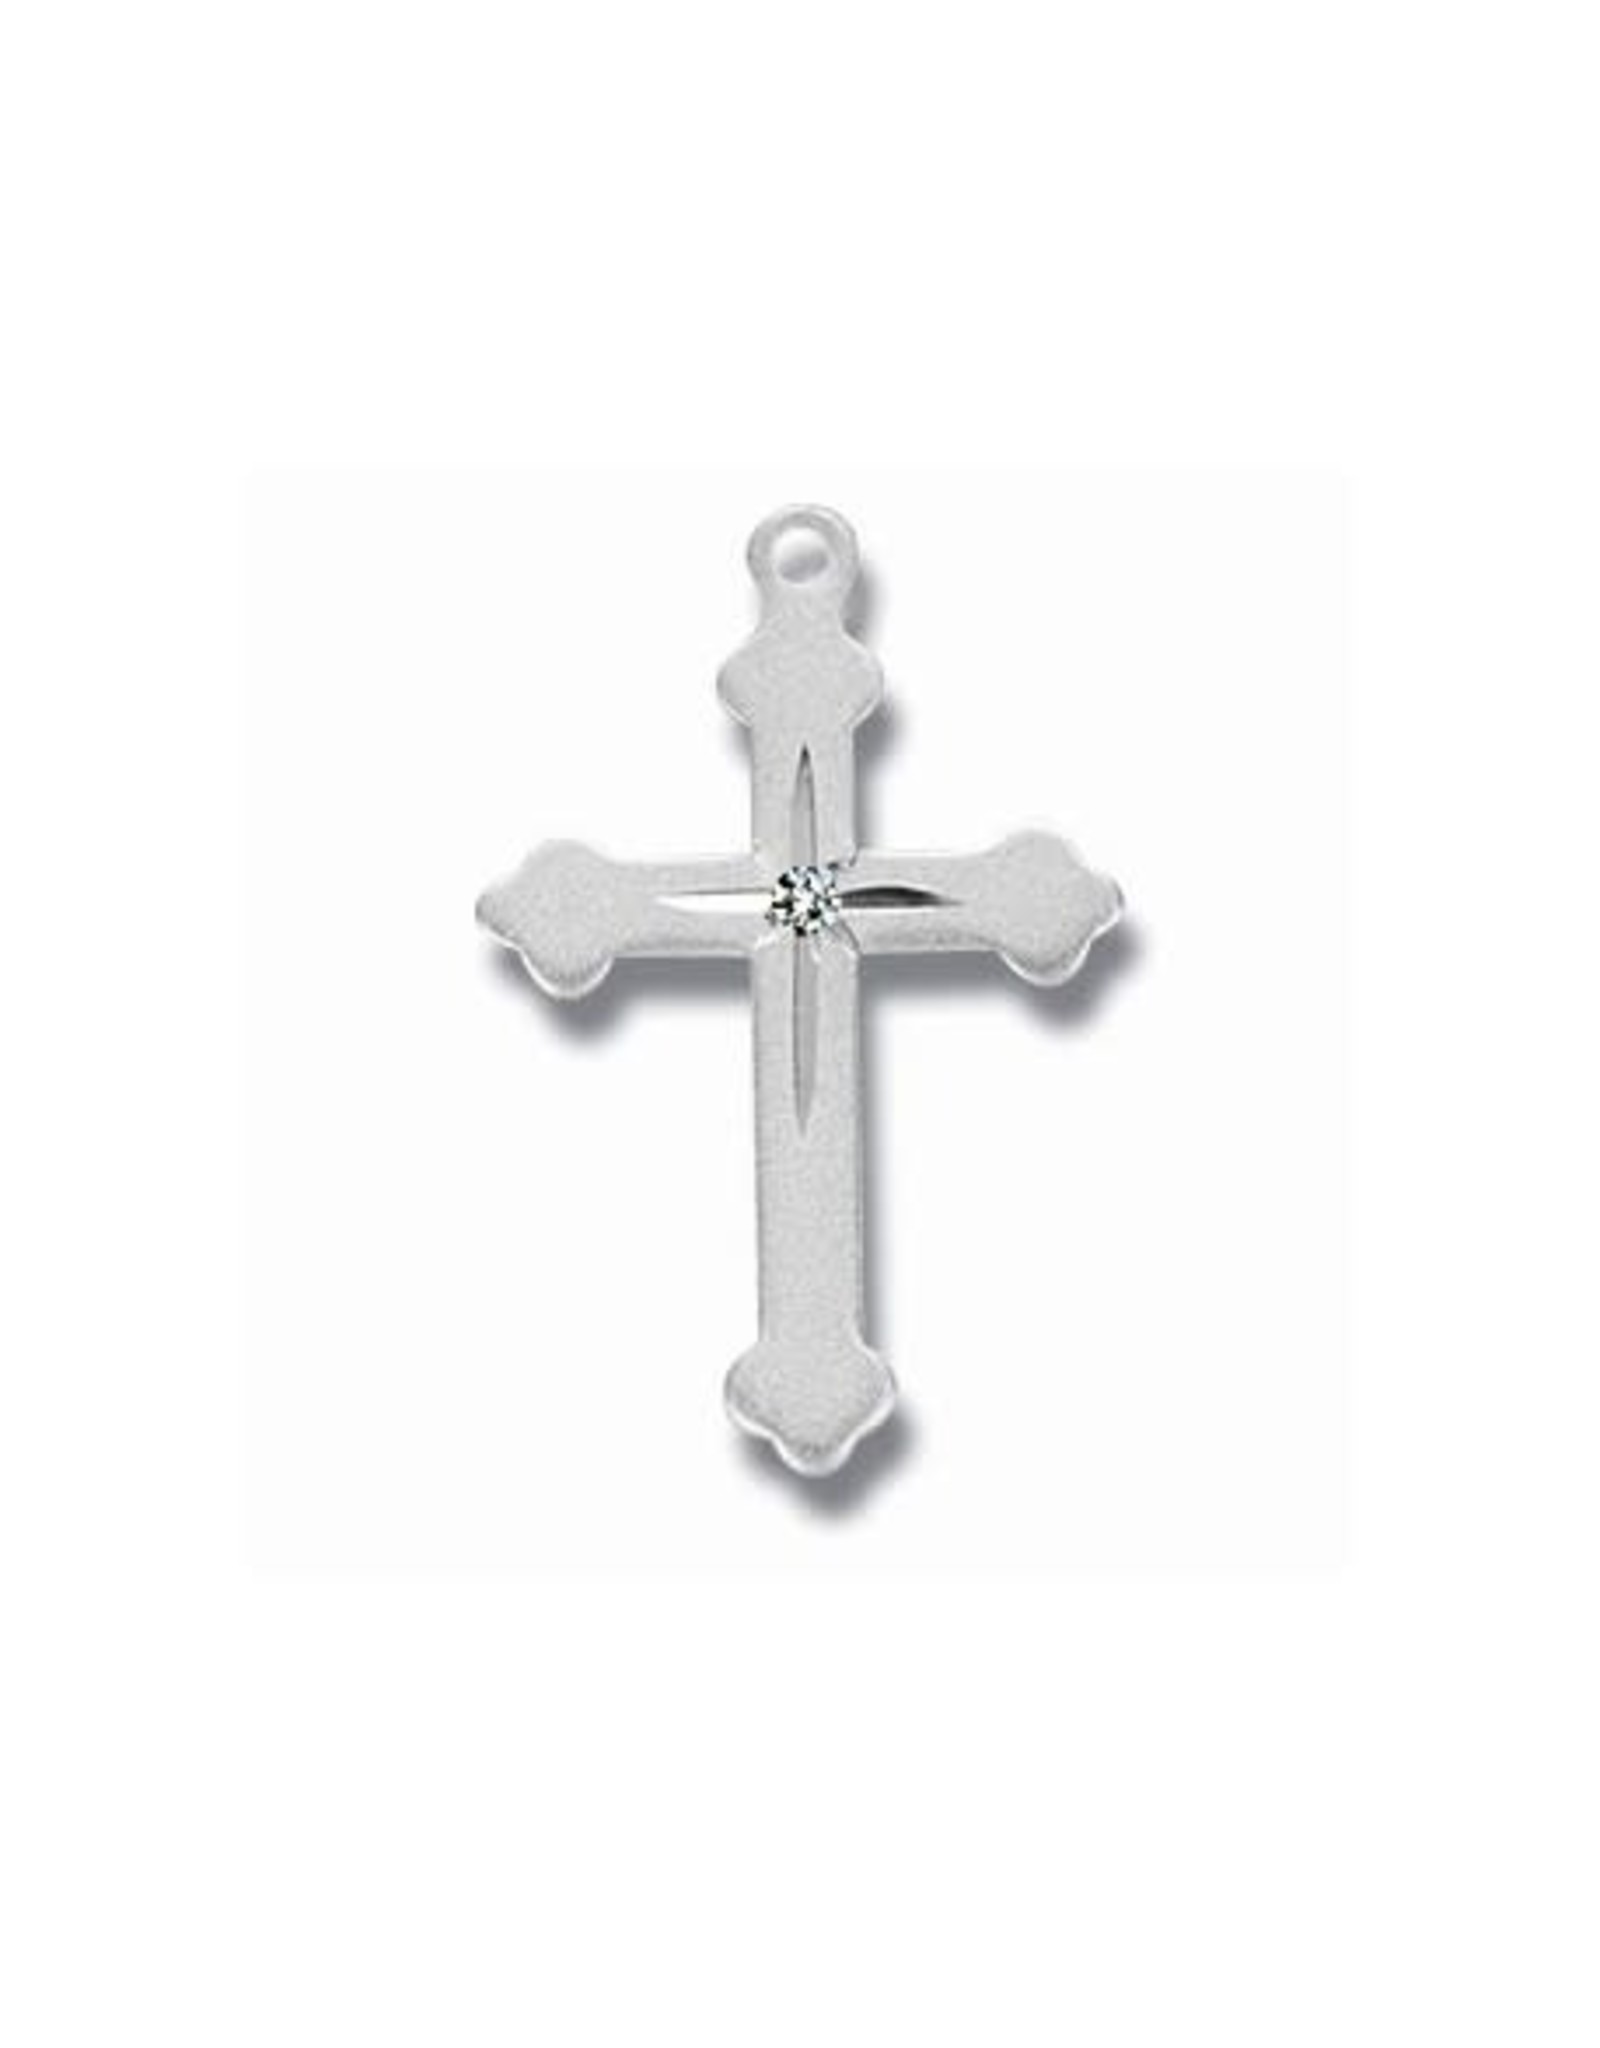 HMH Cross Medal, Textured, Sterling Silver, 18" Chain